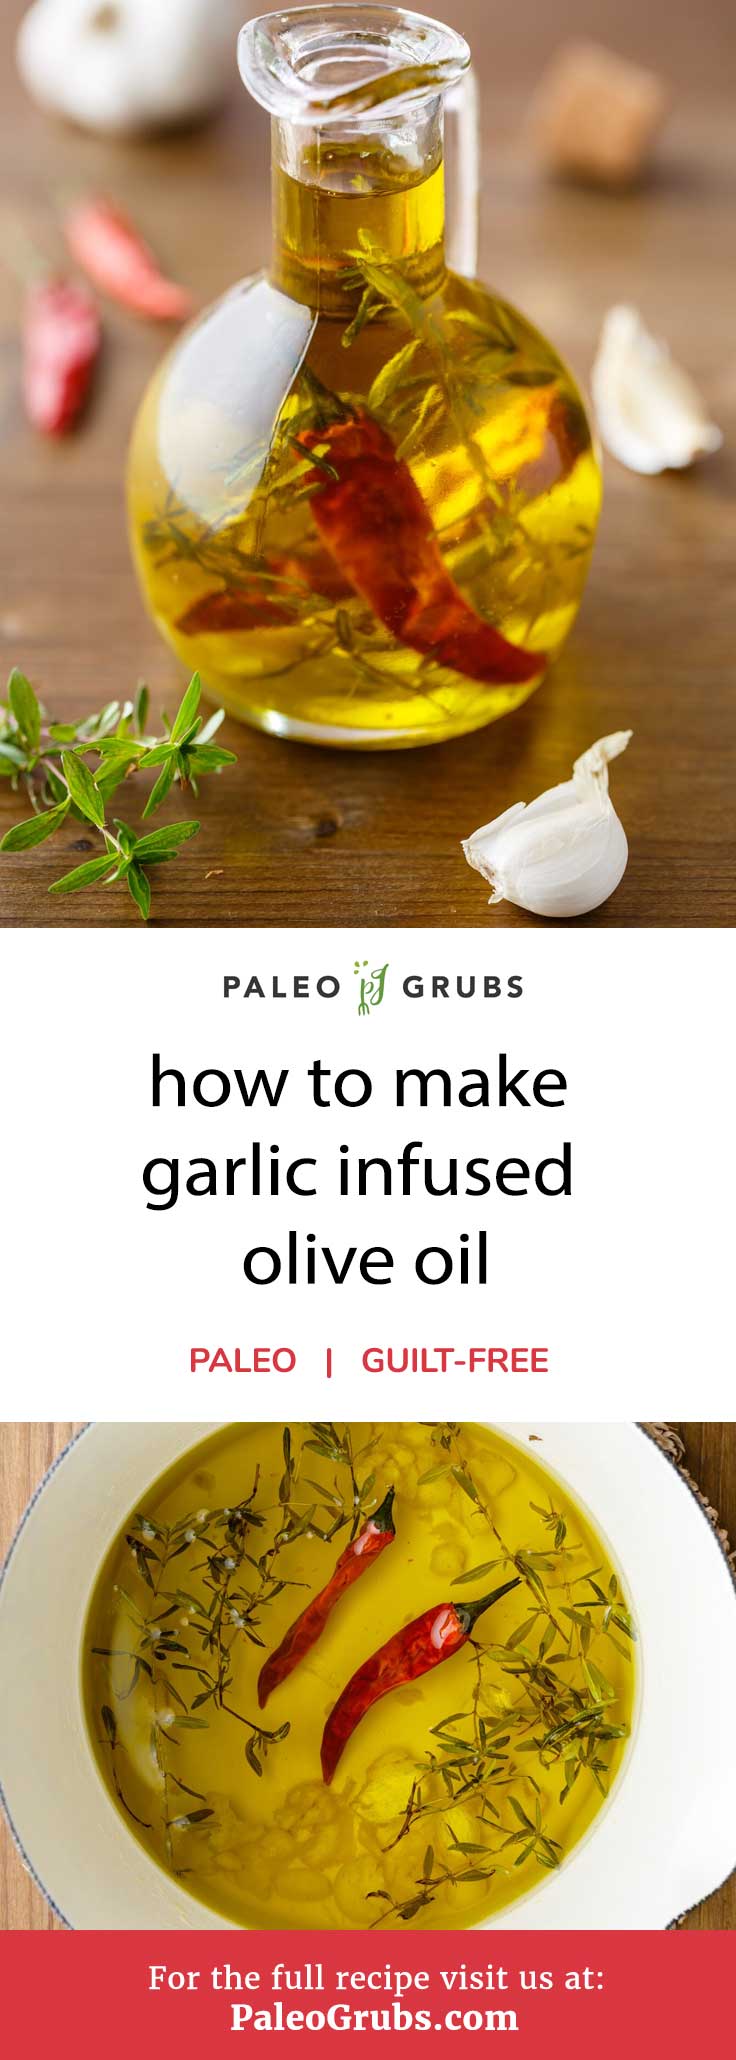 Many people are now aware just how bad vegetable oil is for your health and that you should use healthier alternatives for cooking. Olive oil is one such alternative. However, some people aren’t particularly fond of the distinct taste that it has.

If that sounds like you, then you have got to try out this recipe for garlic infused olive oil. It provides all the heart-healthy benefits of olive oil along with the fantastic rich taste of garlic in one easy to prepare recipe.